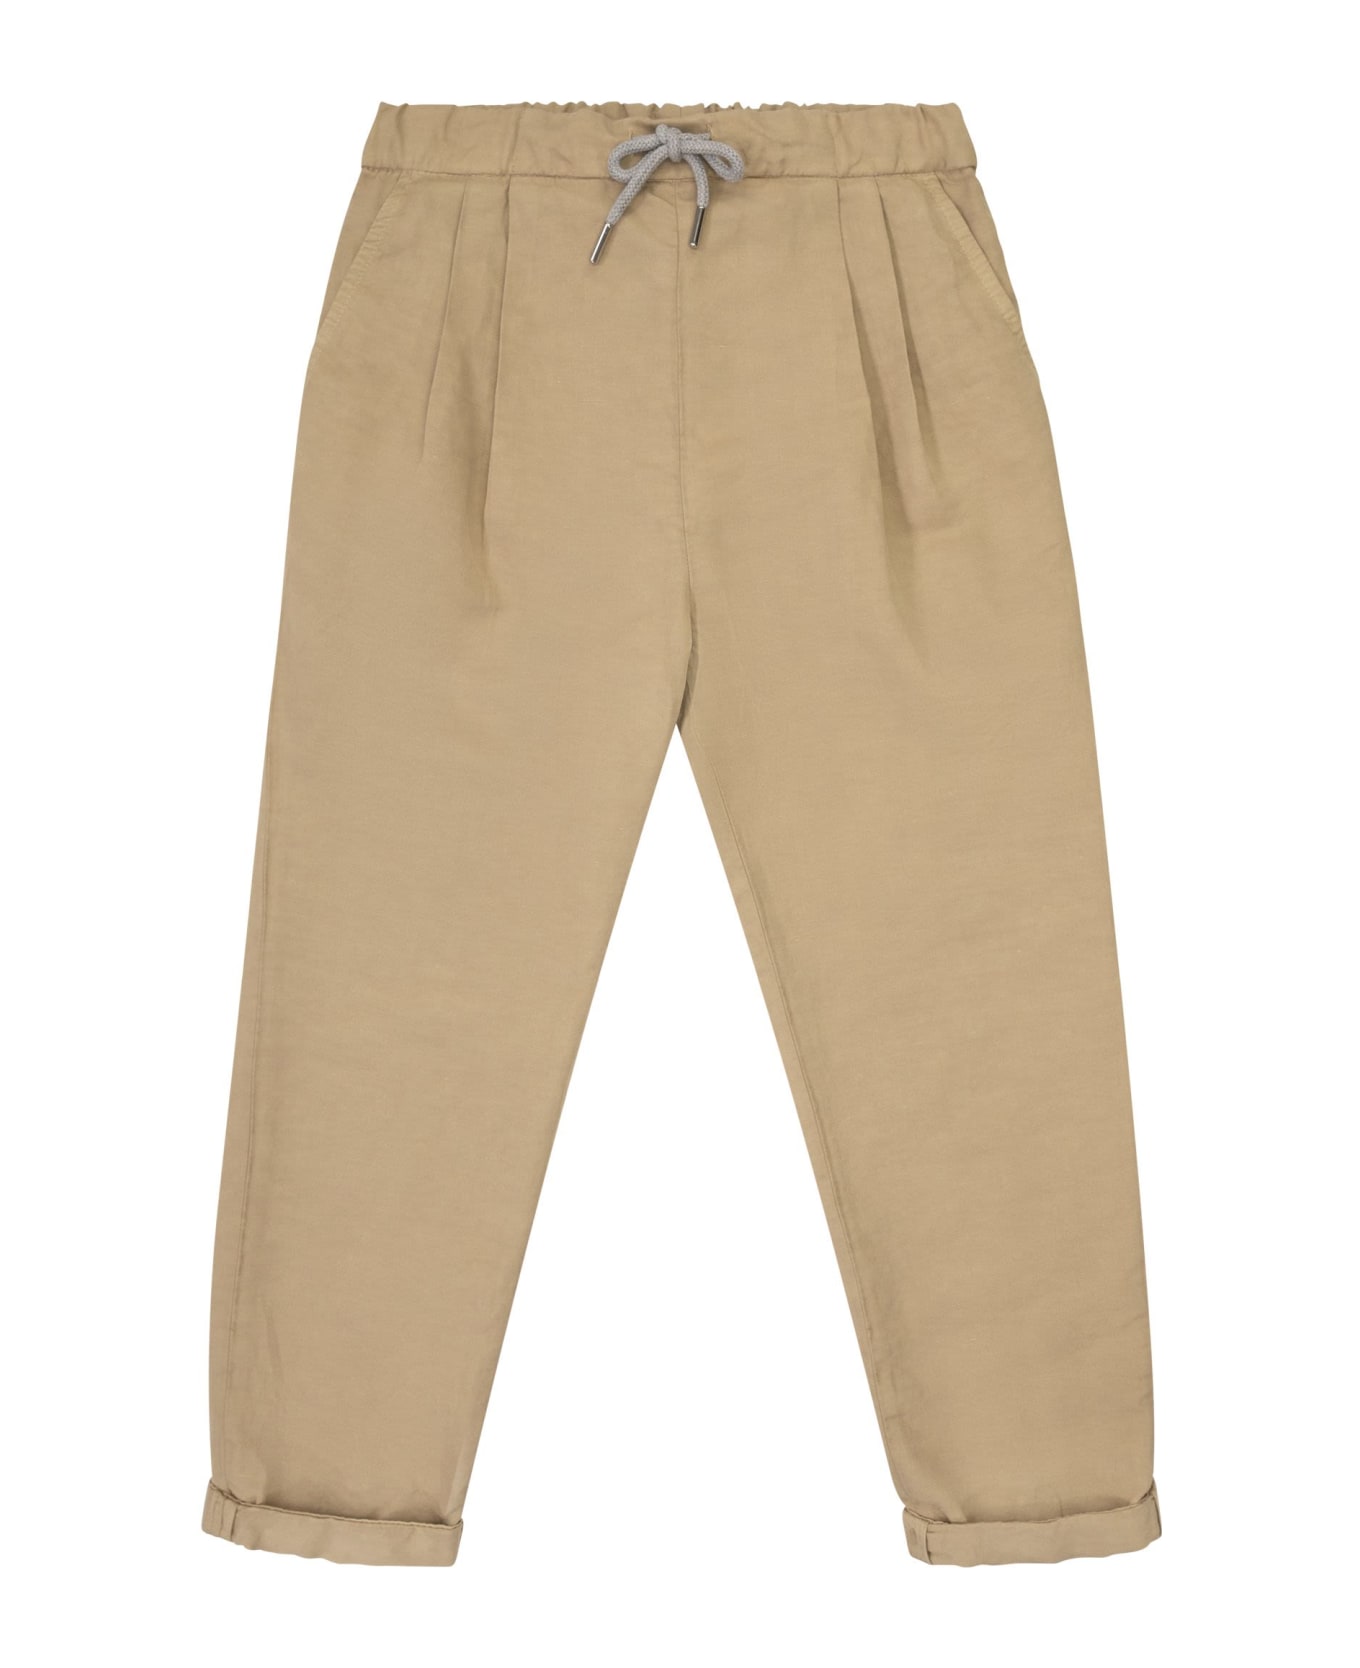 Brunello Cucinelli Garment Dyed Linen And Twisted Cotton Gabardine Trousers With Drawstring - Beige ボトムス